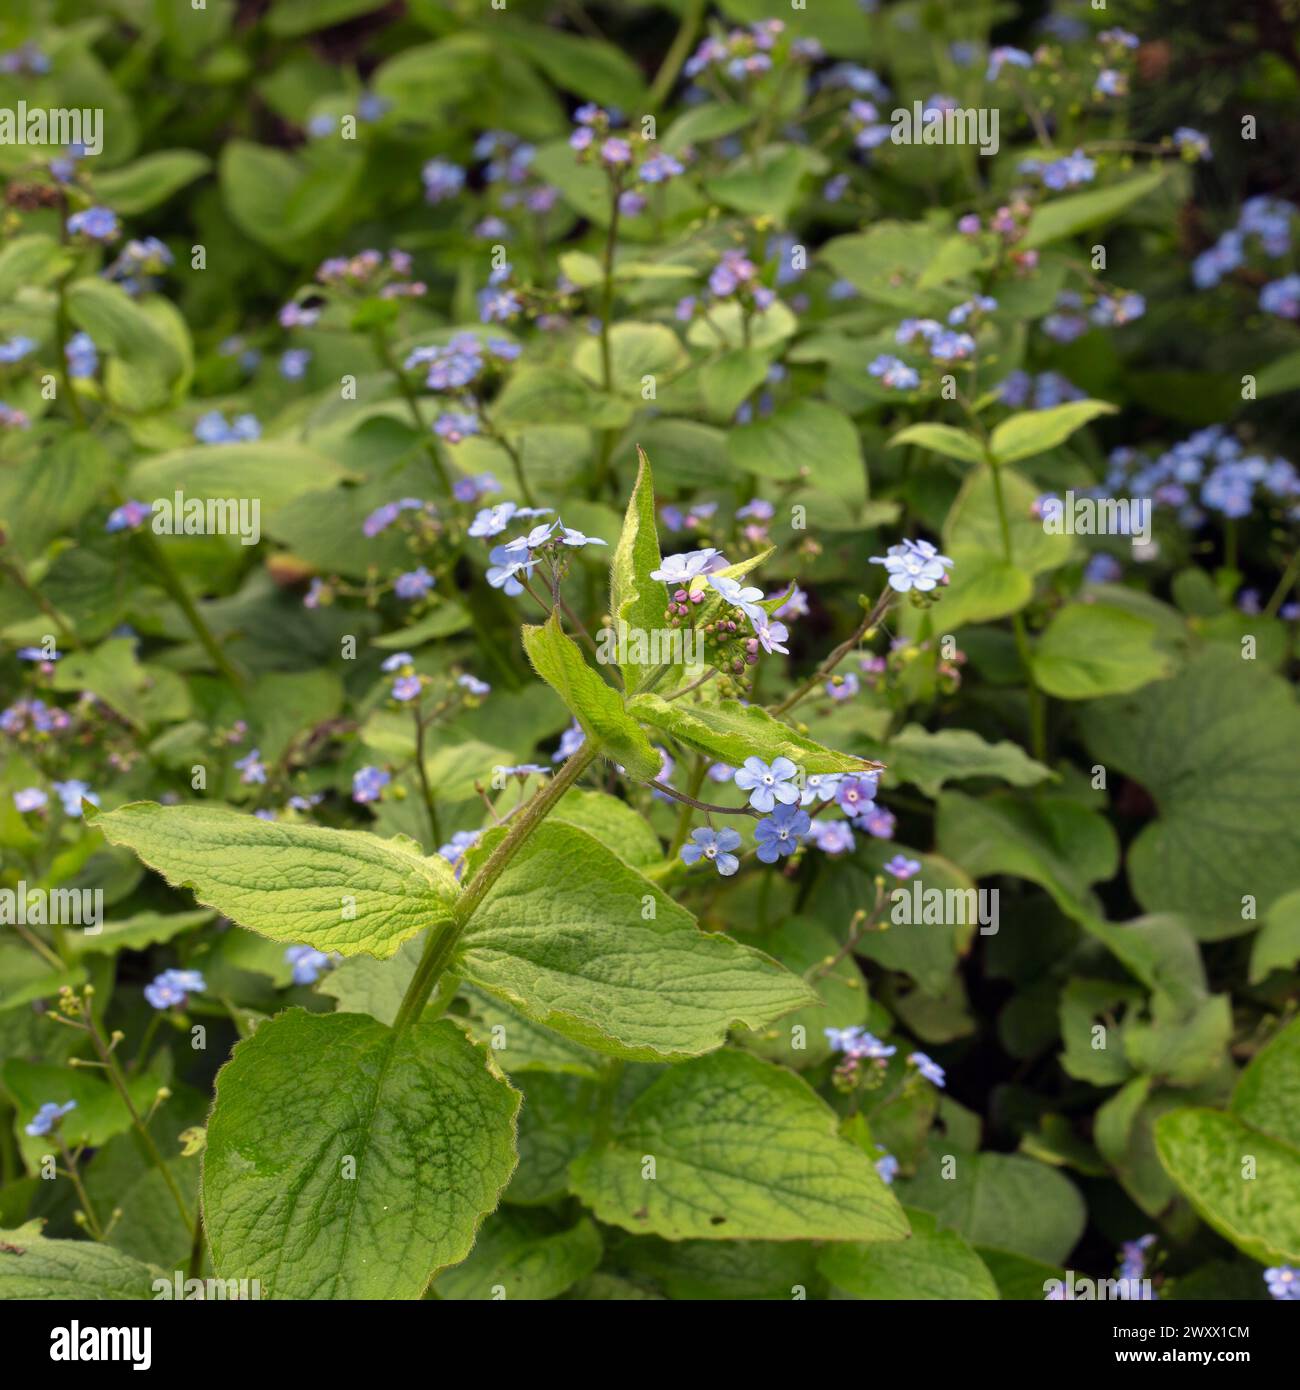 Closeup of flowers of Pulmonaria saccharata (Bethlehem sage) in a garden in early Spring Stock Photo